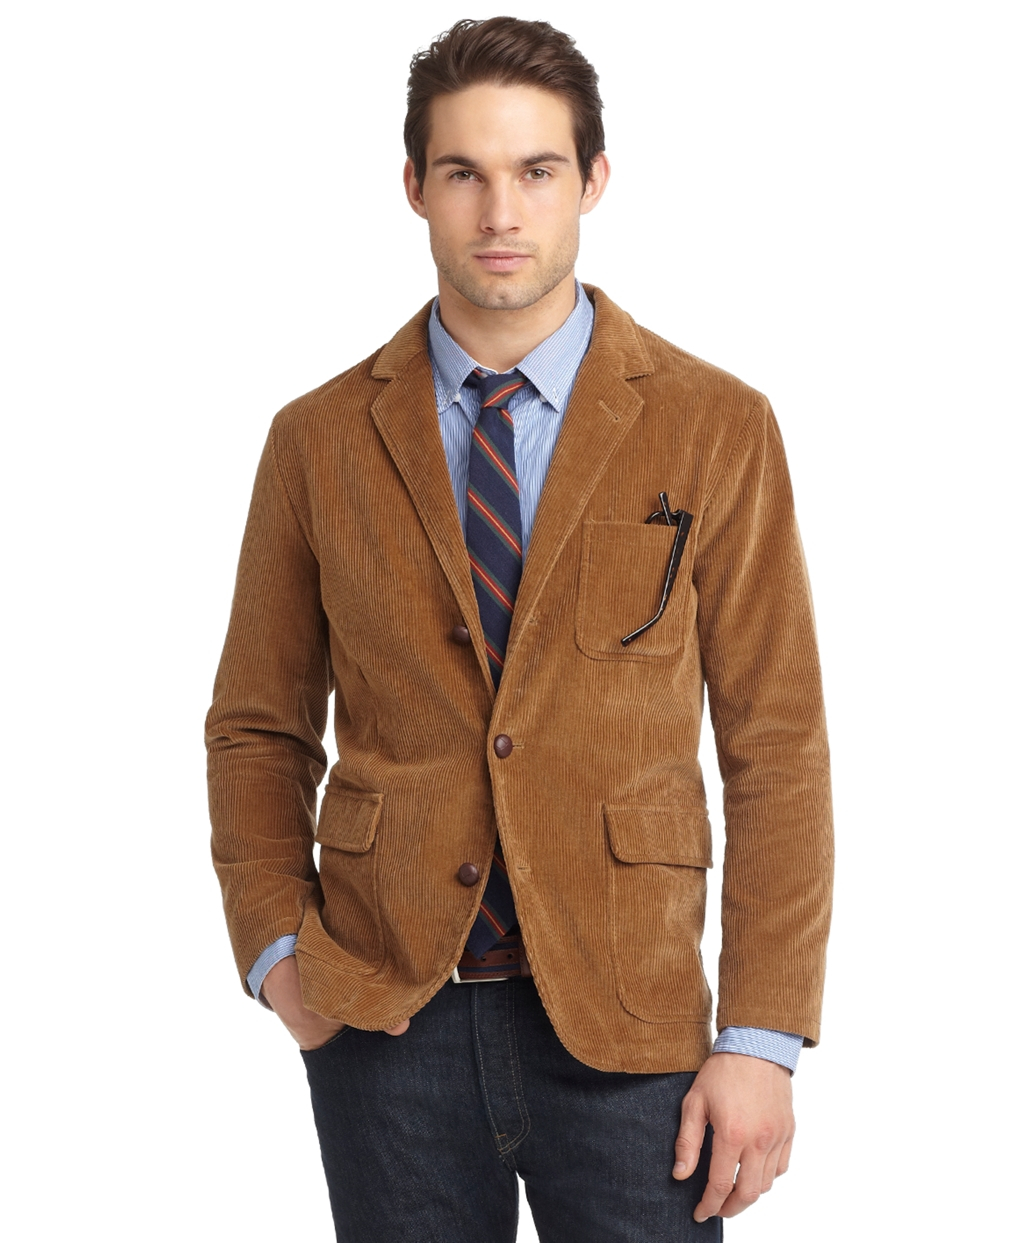 Lyst - Brooks Brothers Corduroy Blazer in Brown for Men